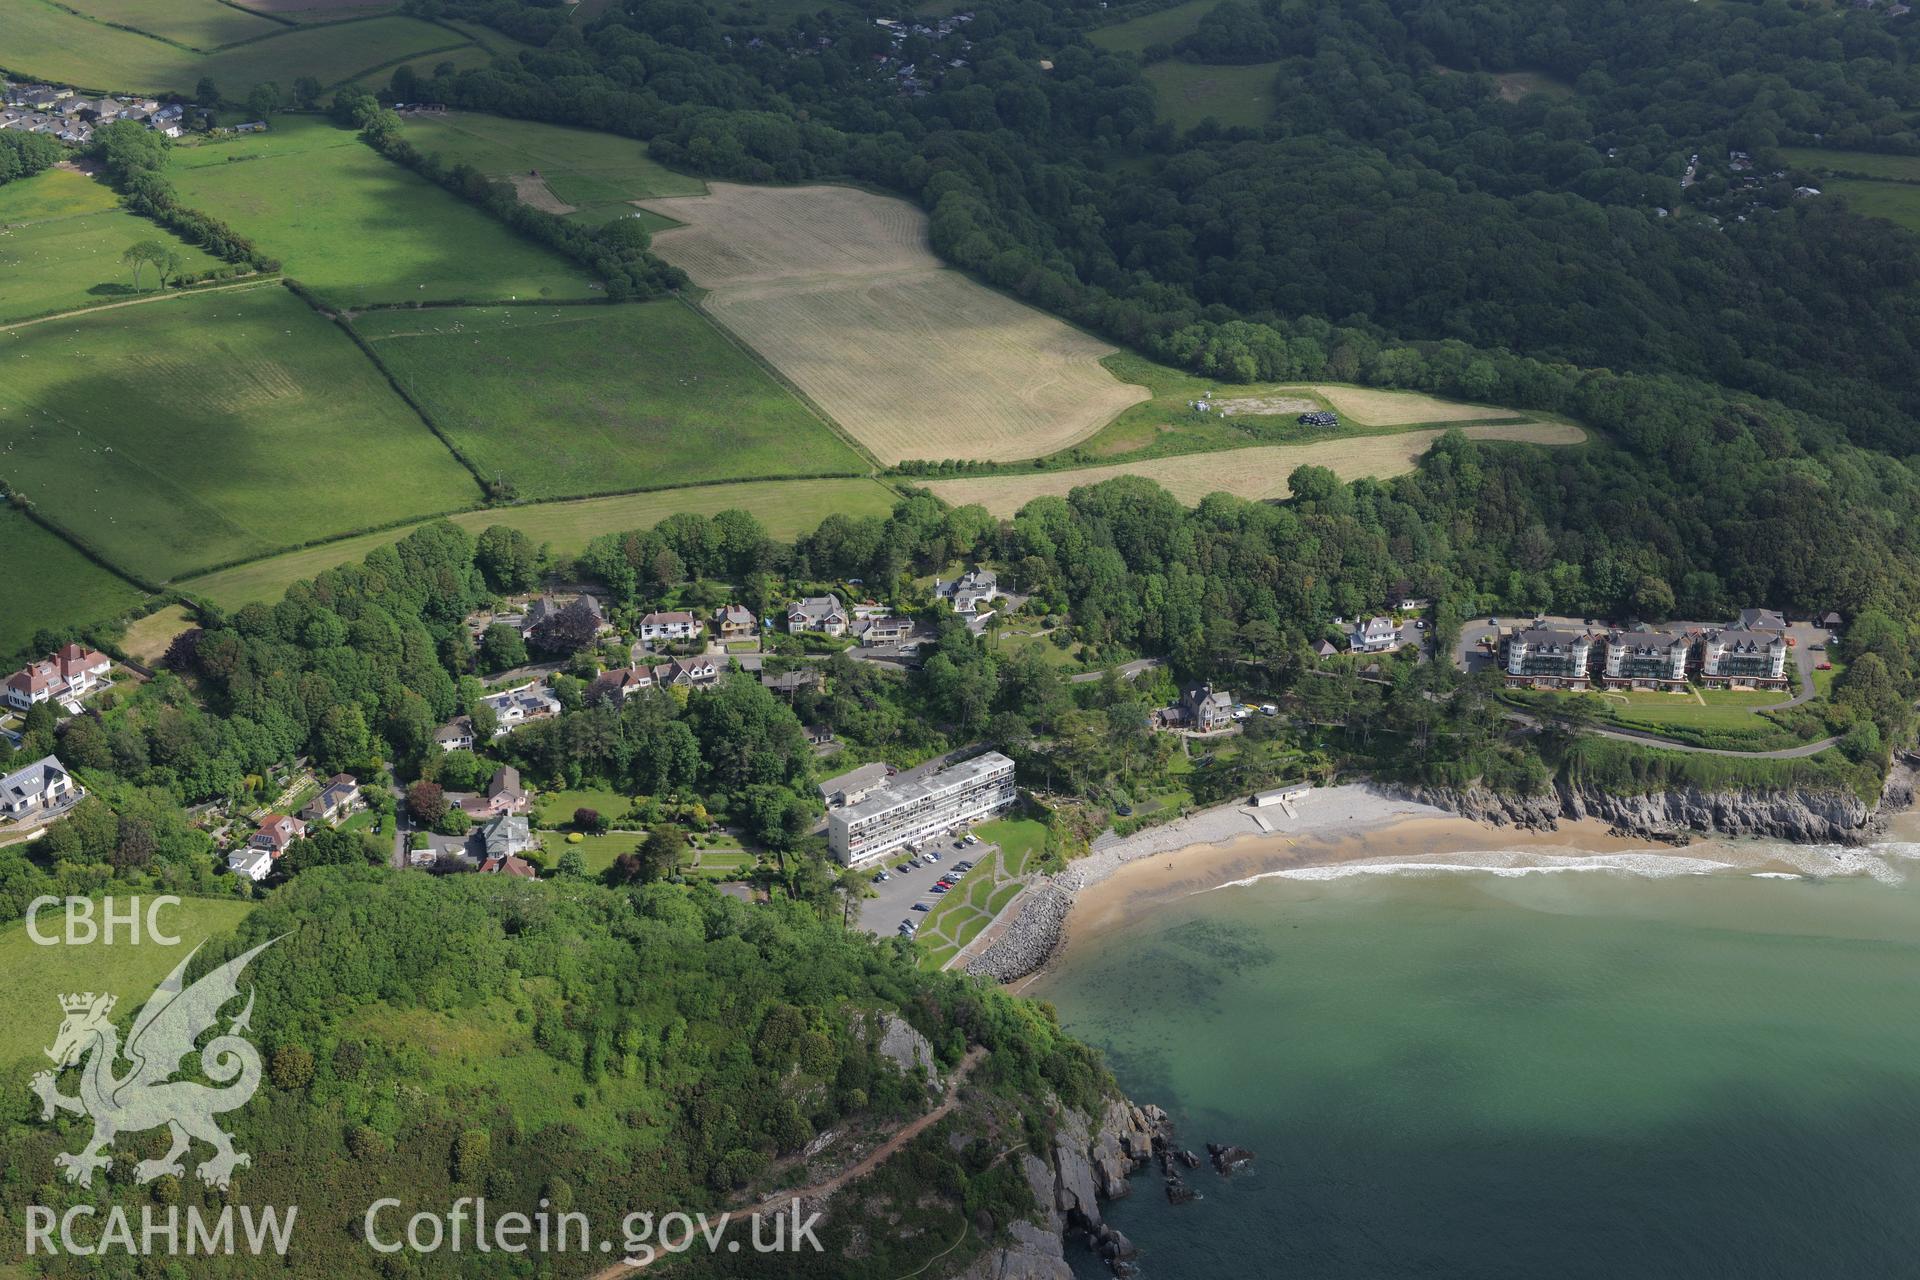 Caswell Cliff Fort, Victoria Villa and housing at Caswell Bay. Oblique aerial photograph taken during the Royal Commission's programme of archaeological aerial reconnaissance by Toby Driver on 19th June 2015.